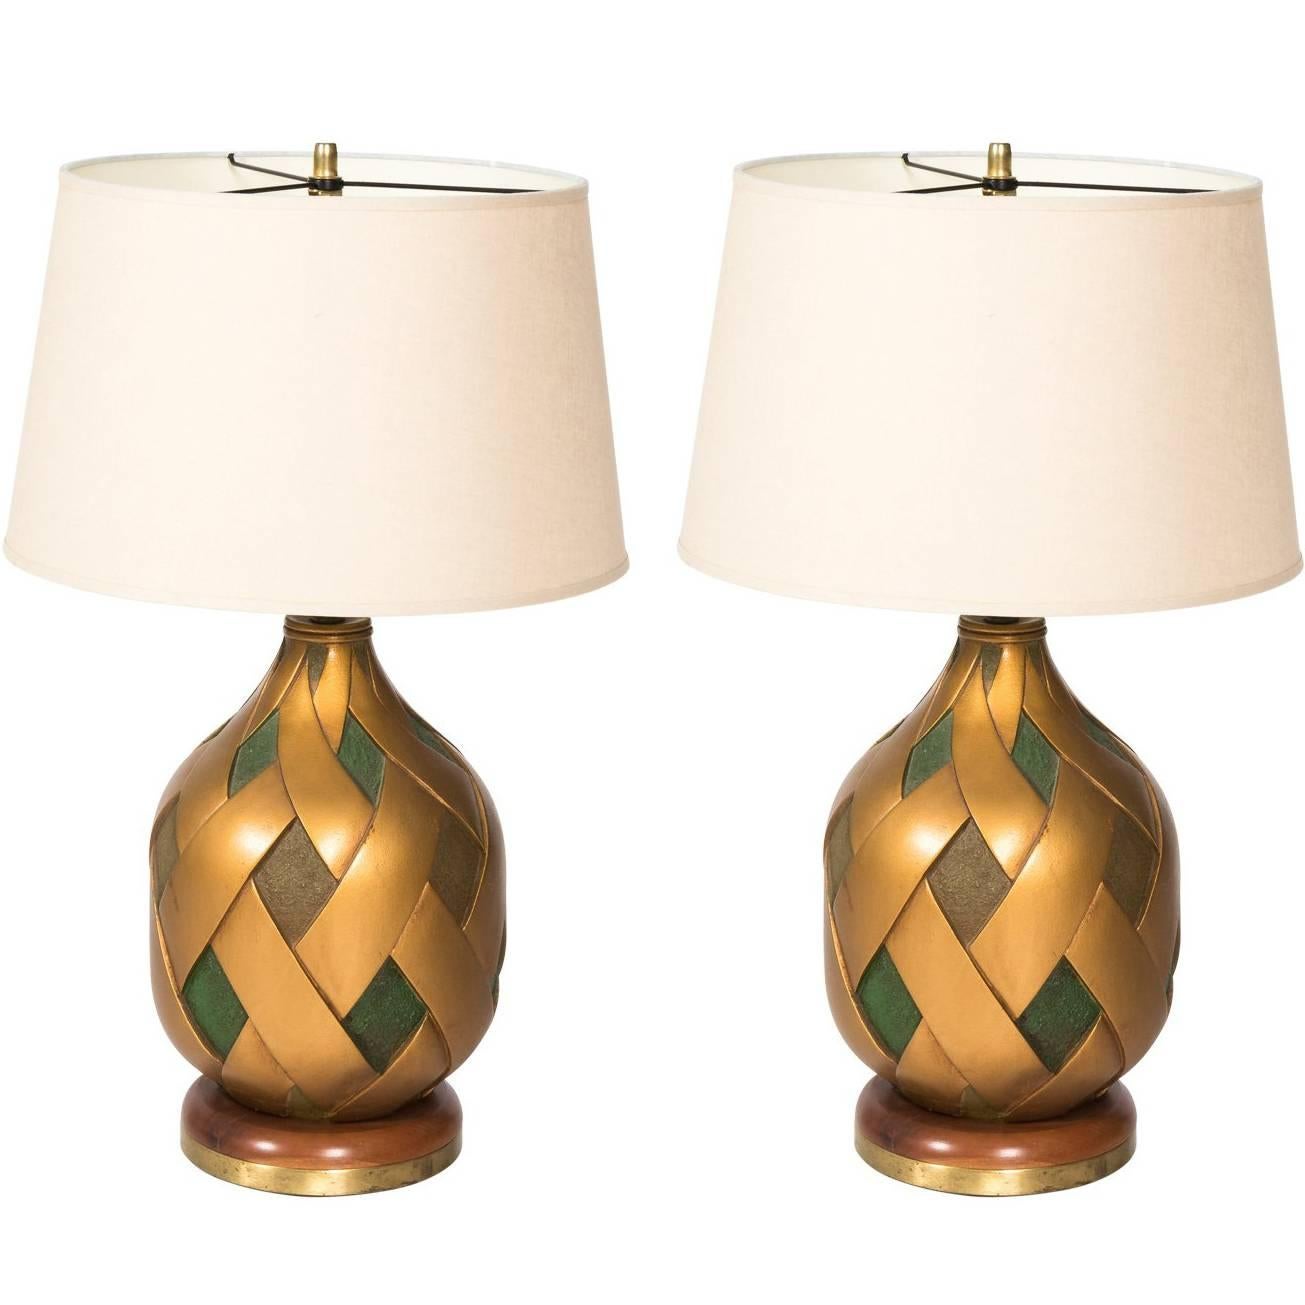 Midcentury Golden and Green Lamps